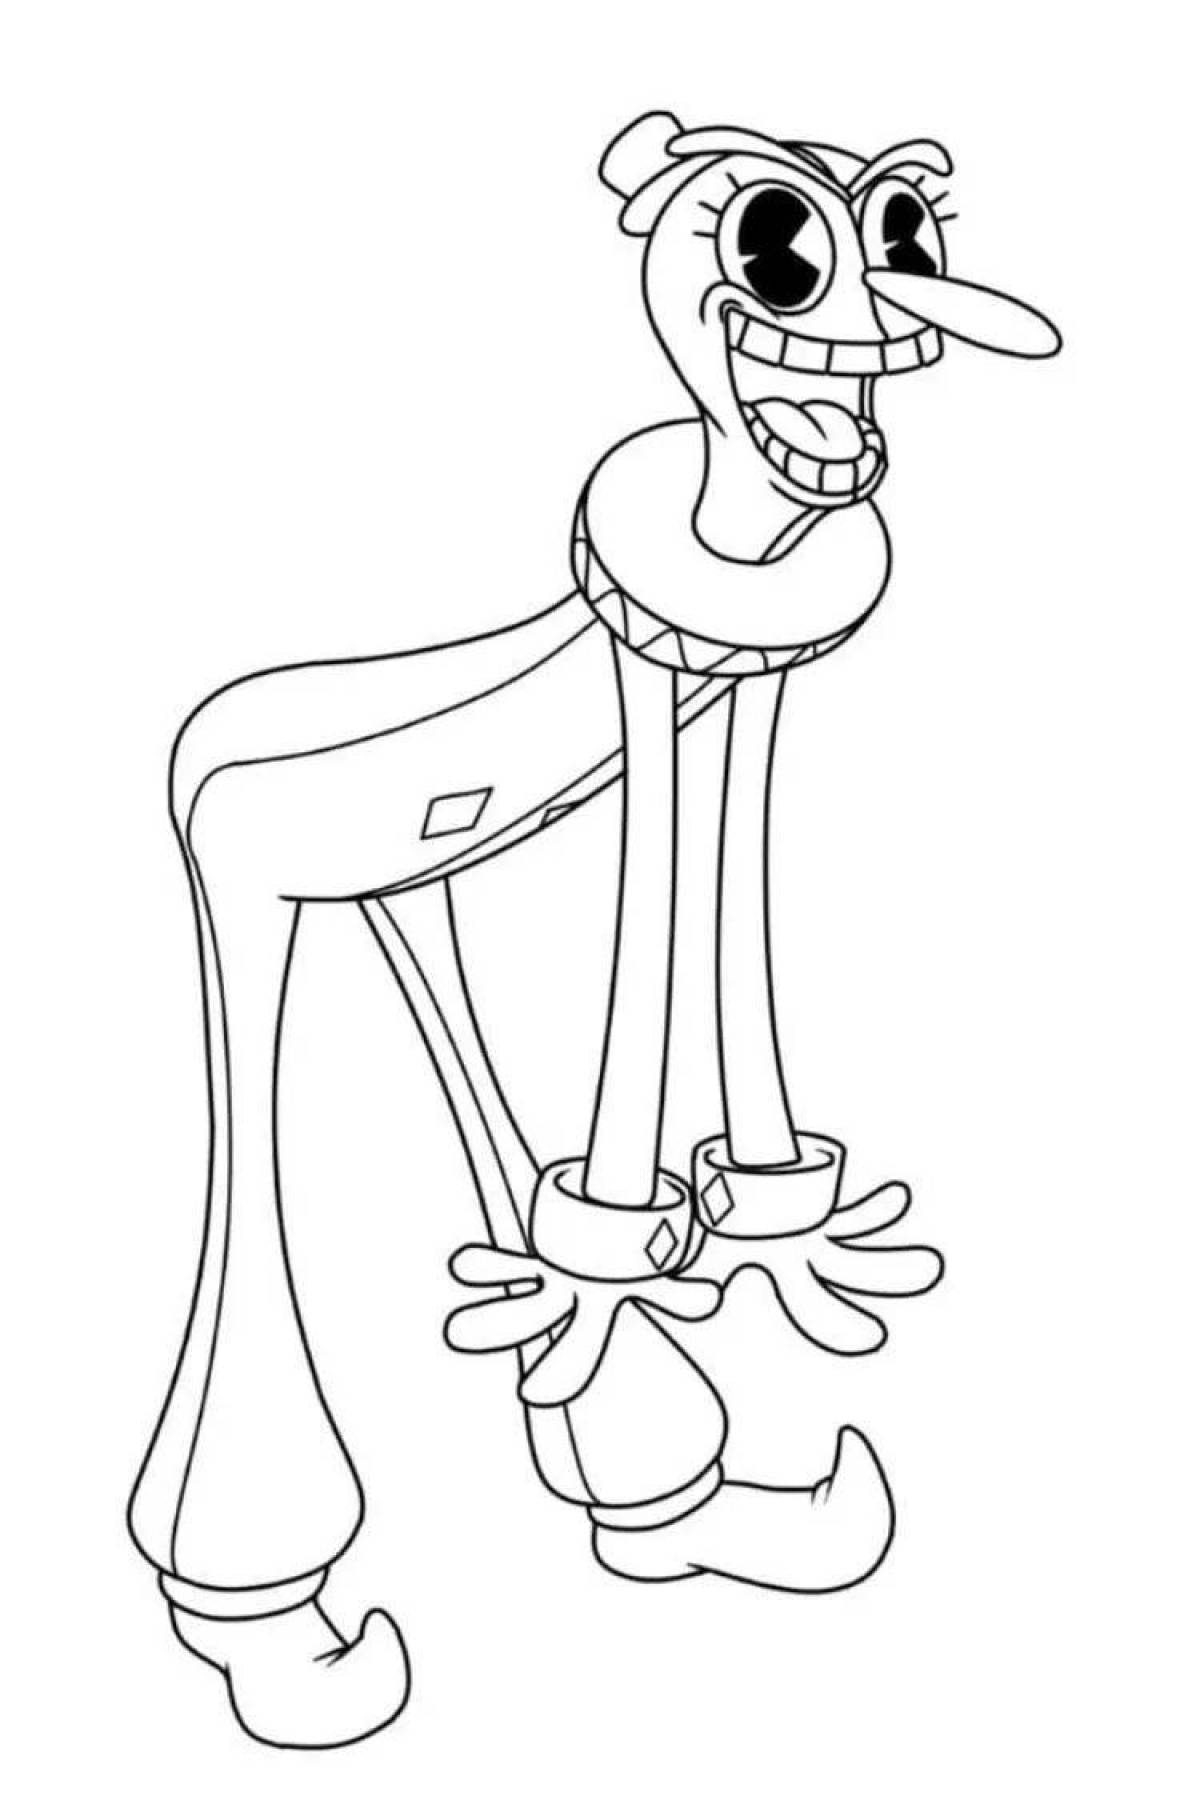 Coloring page humorous cuphead bosses